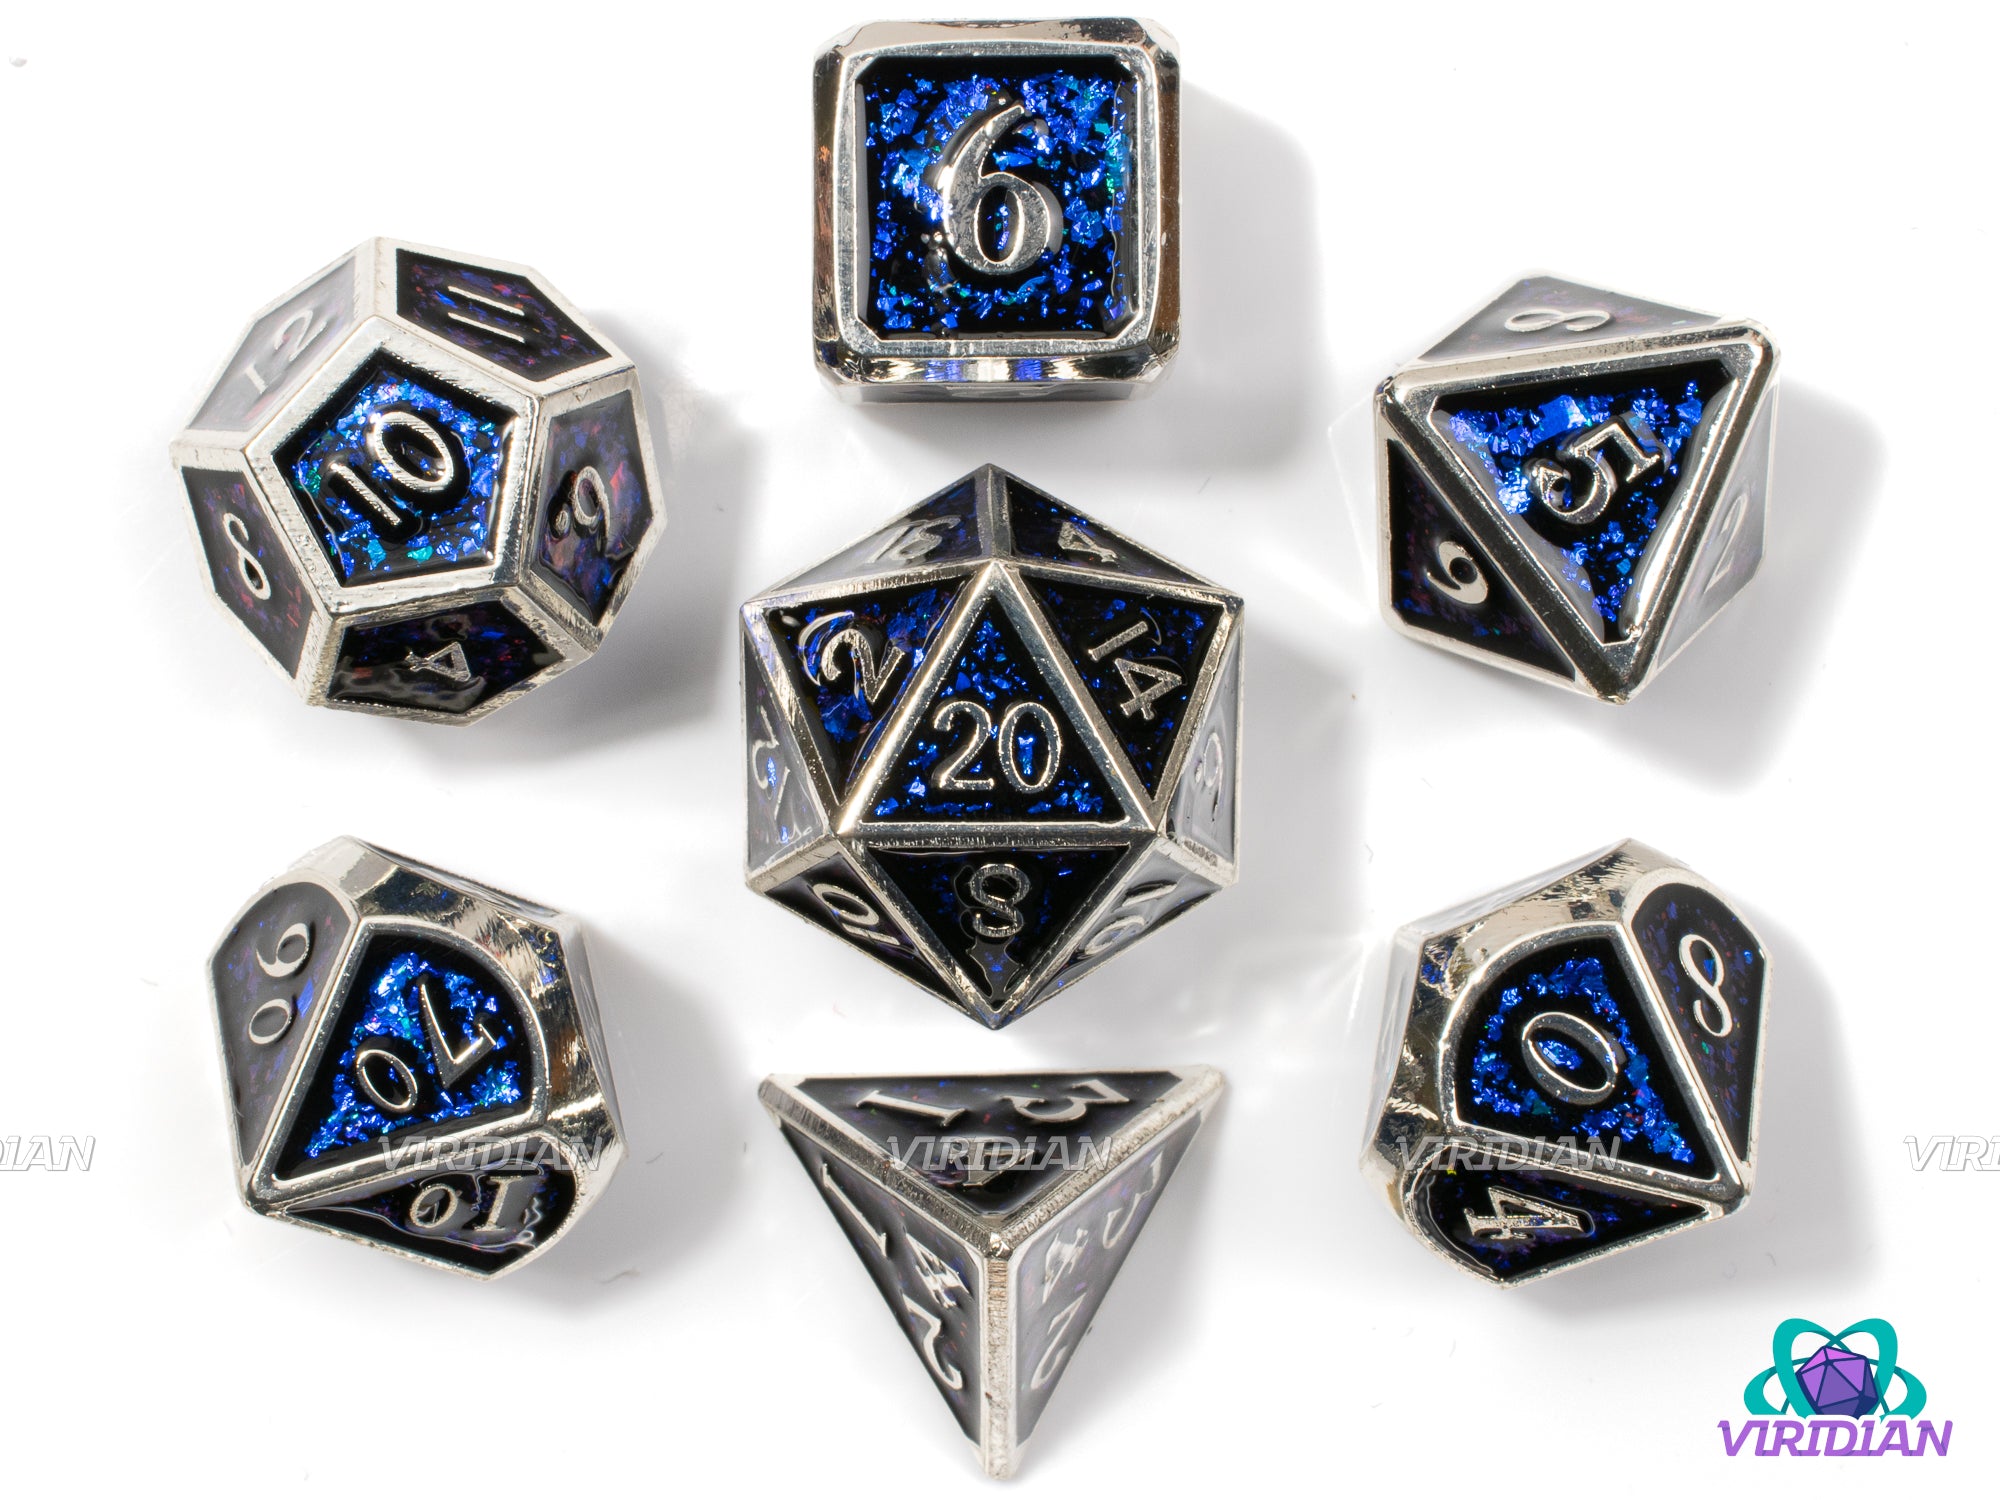 Blue and Silver | Sequined Deep Blue Mica & Black, Silver Gloss | Metal Dice Set (7)